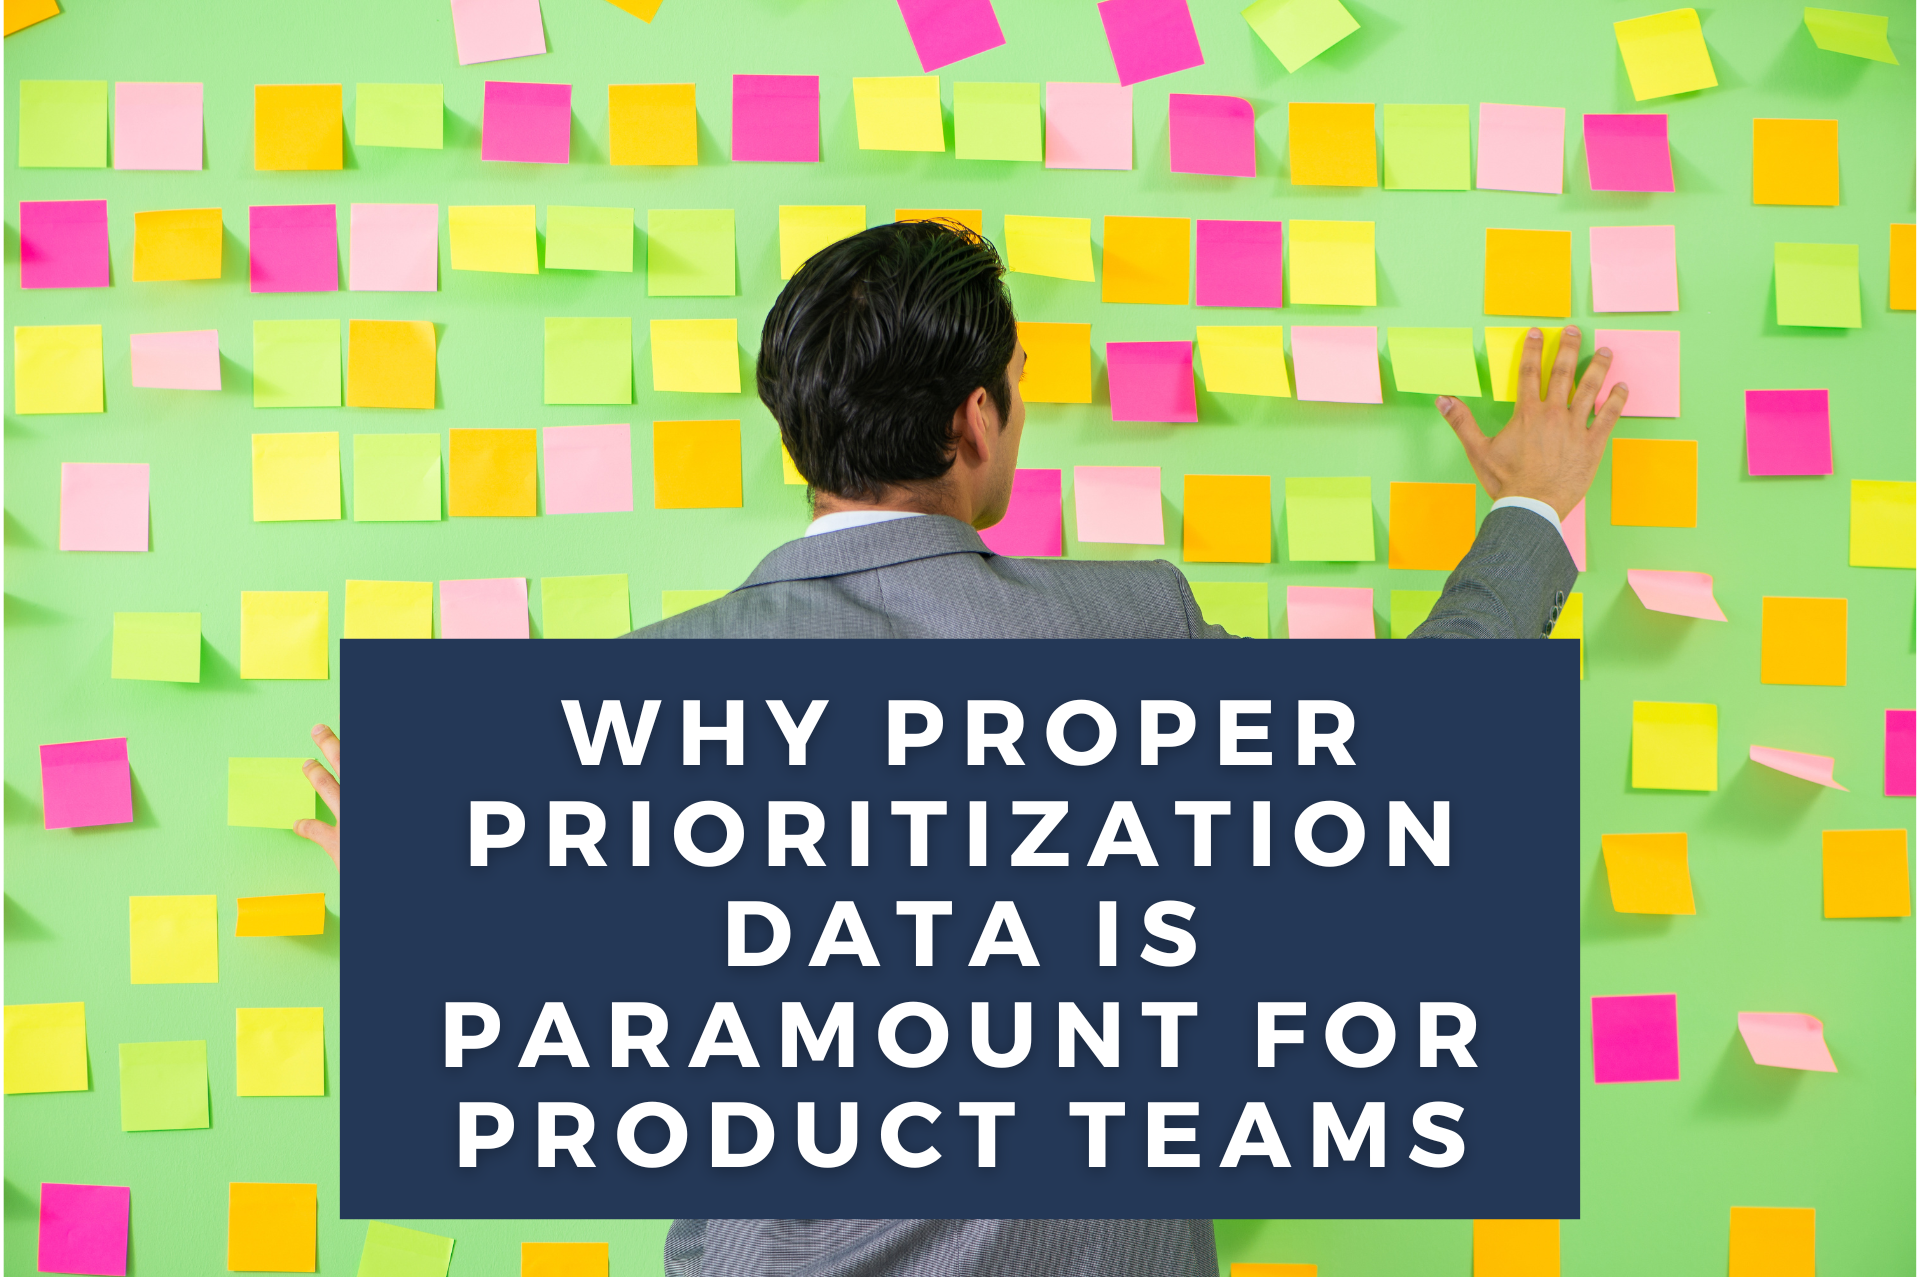 Man looking at a line green wall with many sticky notes covering it. Overlaid text reads, "Why proper prioritization data is paramount for product teams"